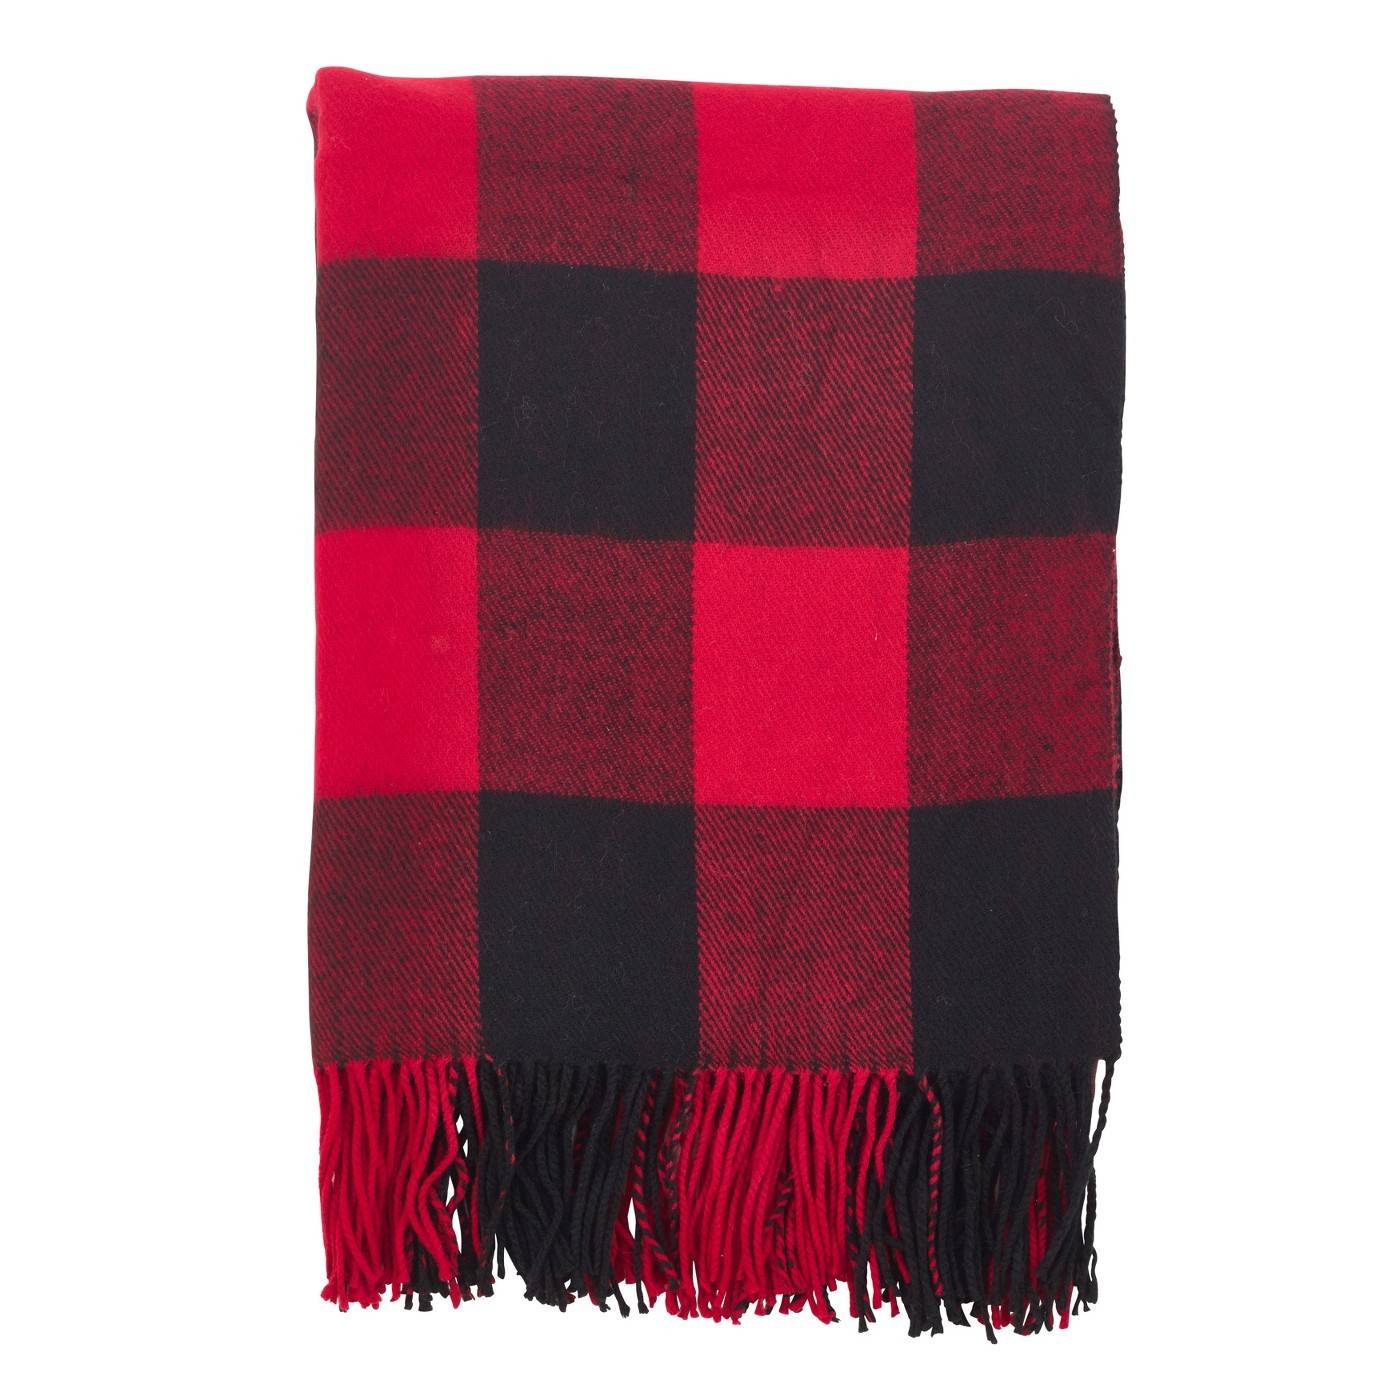 Folded black and red checkered blanket with fringe.